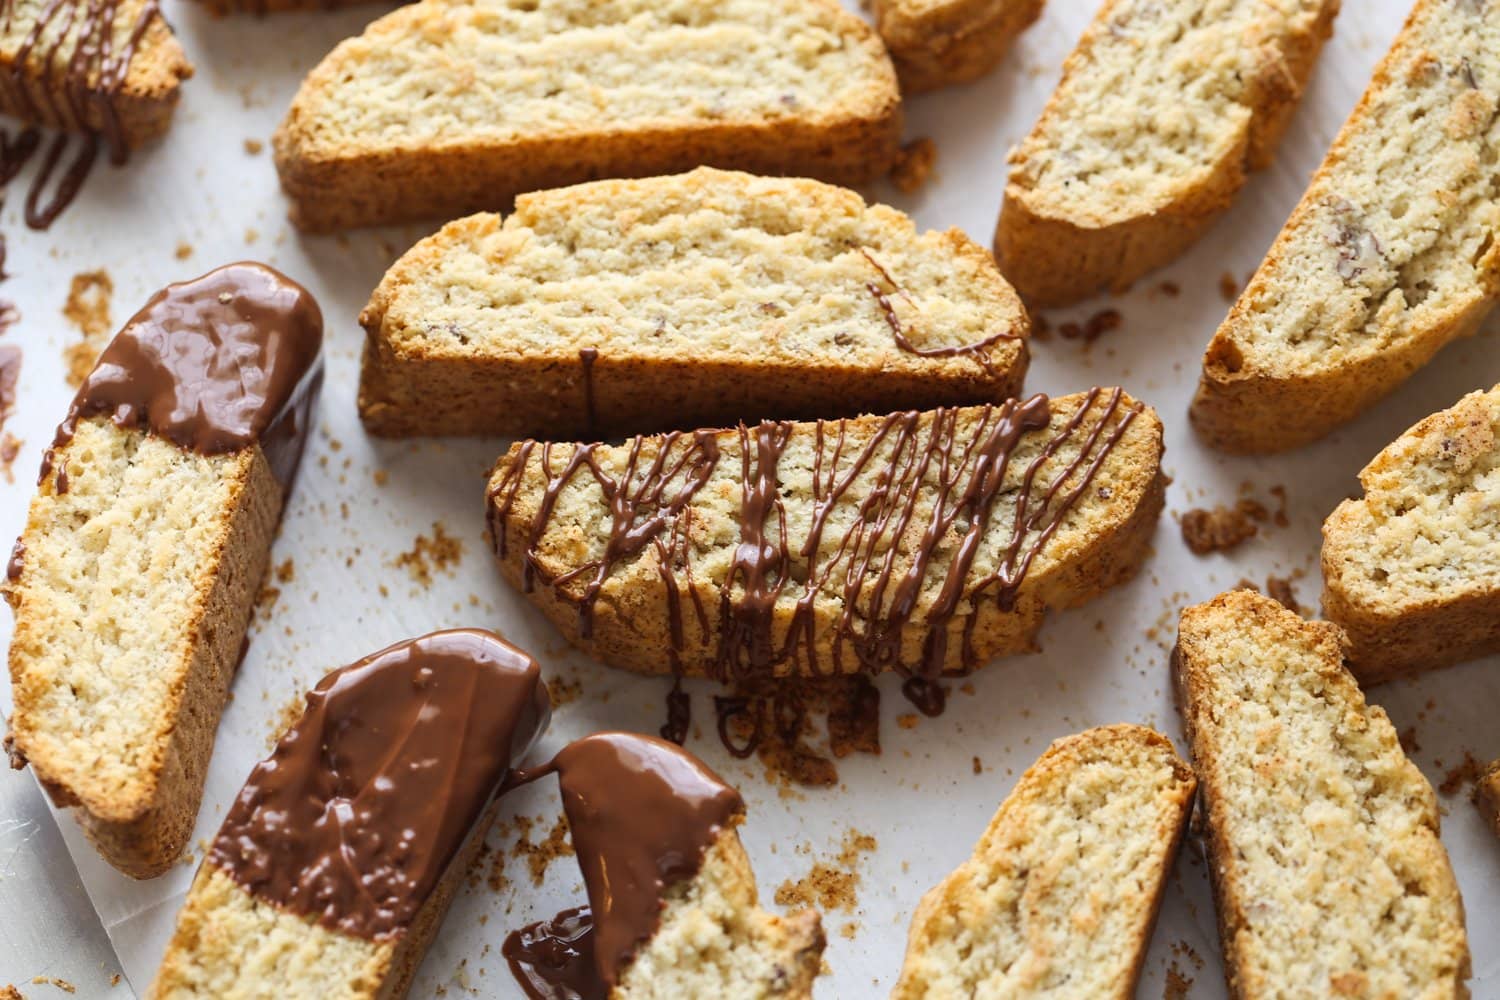 Almond cookies drizzled with chocolate.